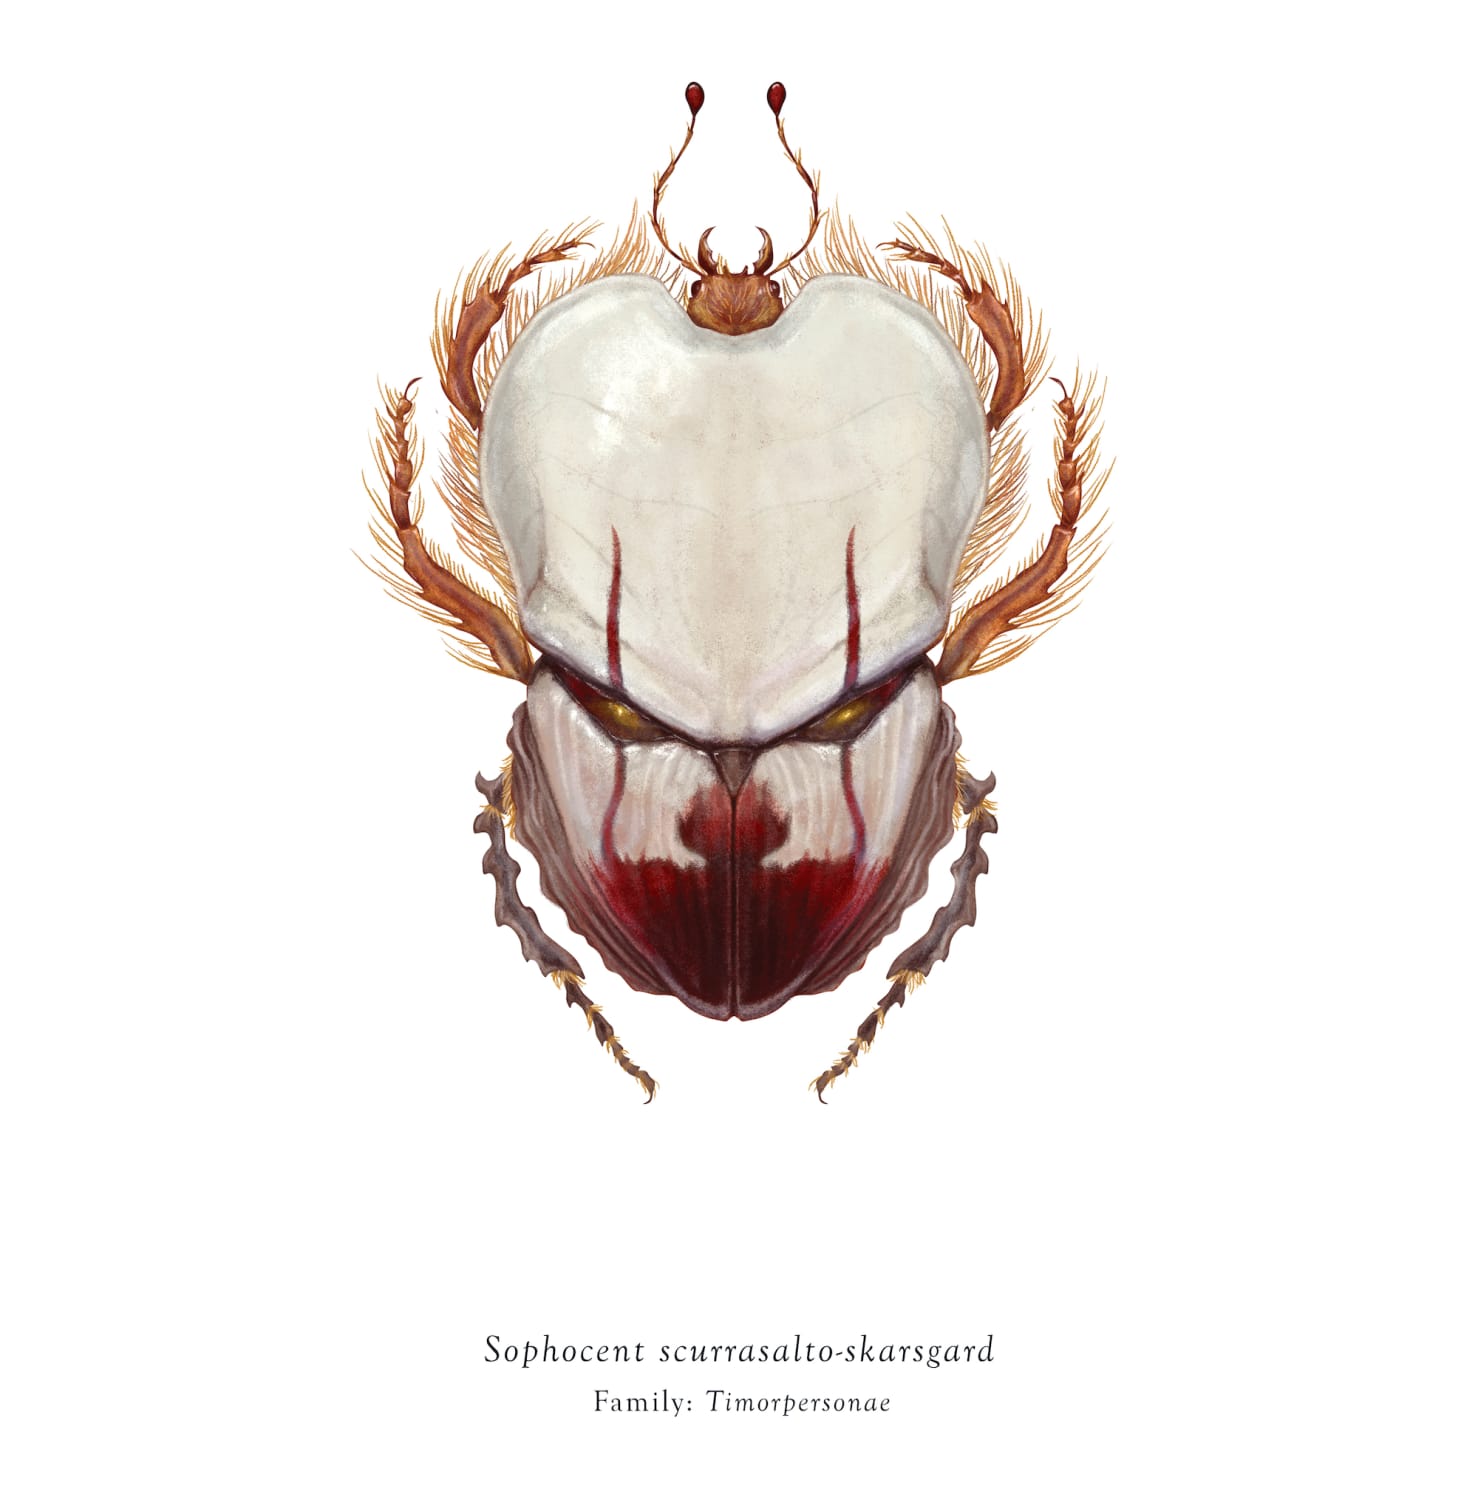 Insect Illustrations Inspired by Looney Tunes Characters and Horror Movie Icons